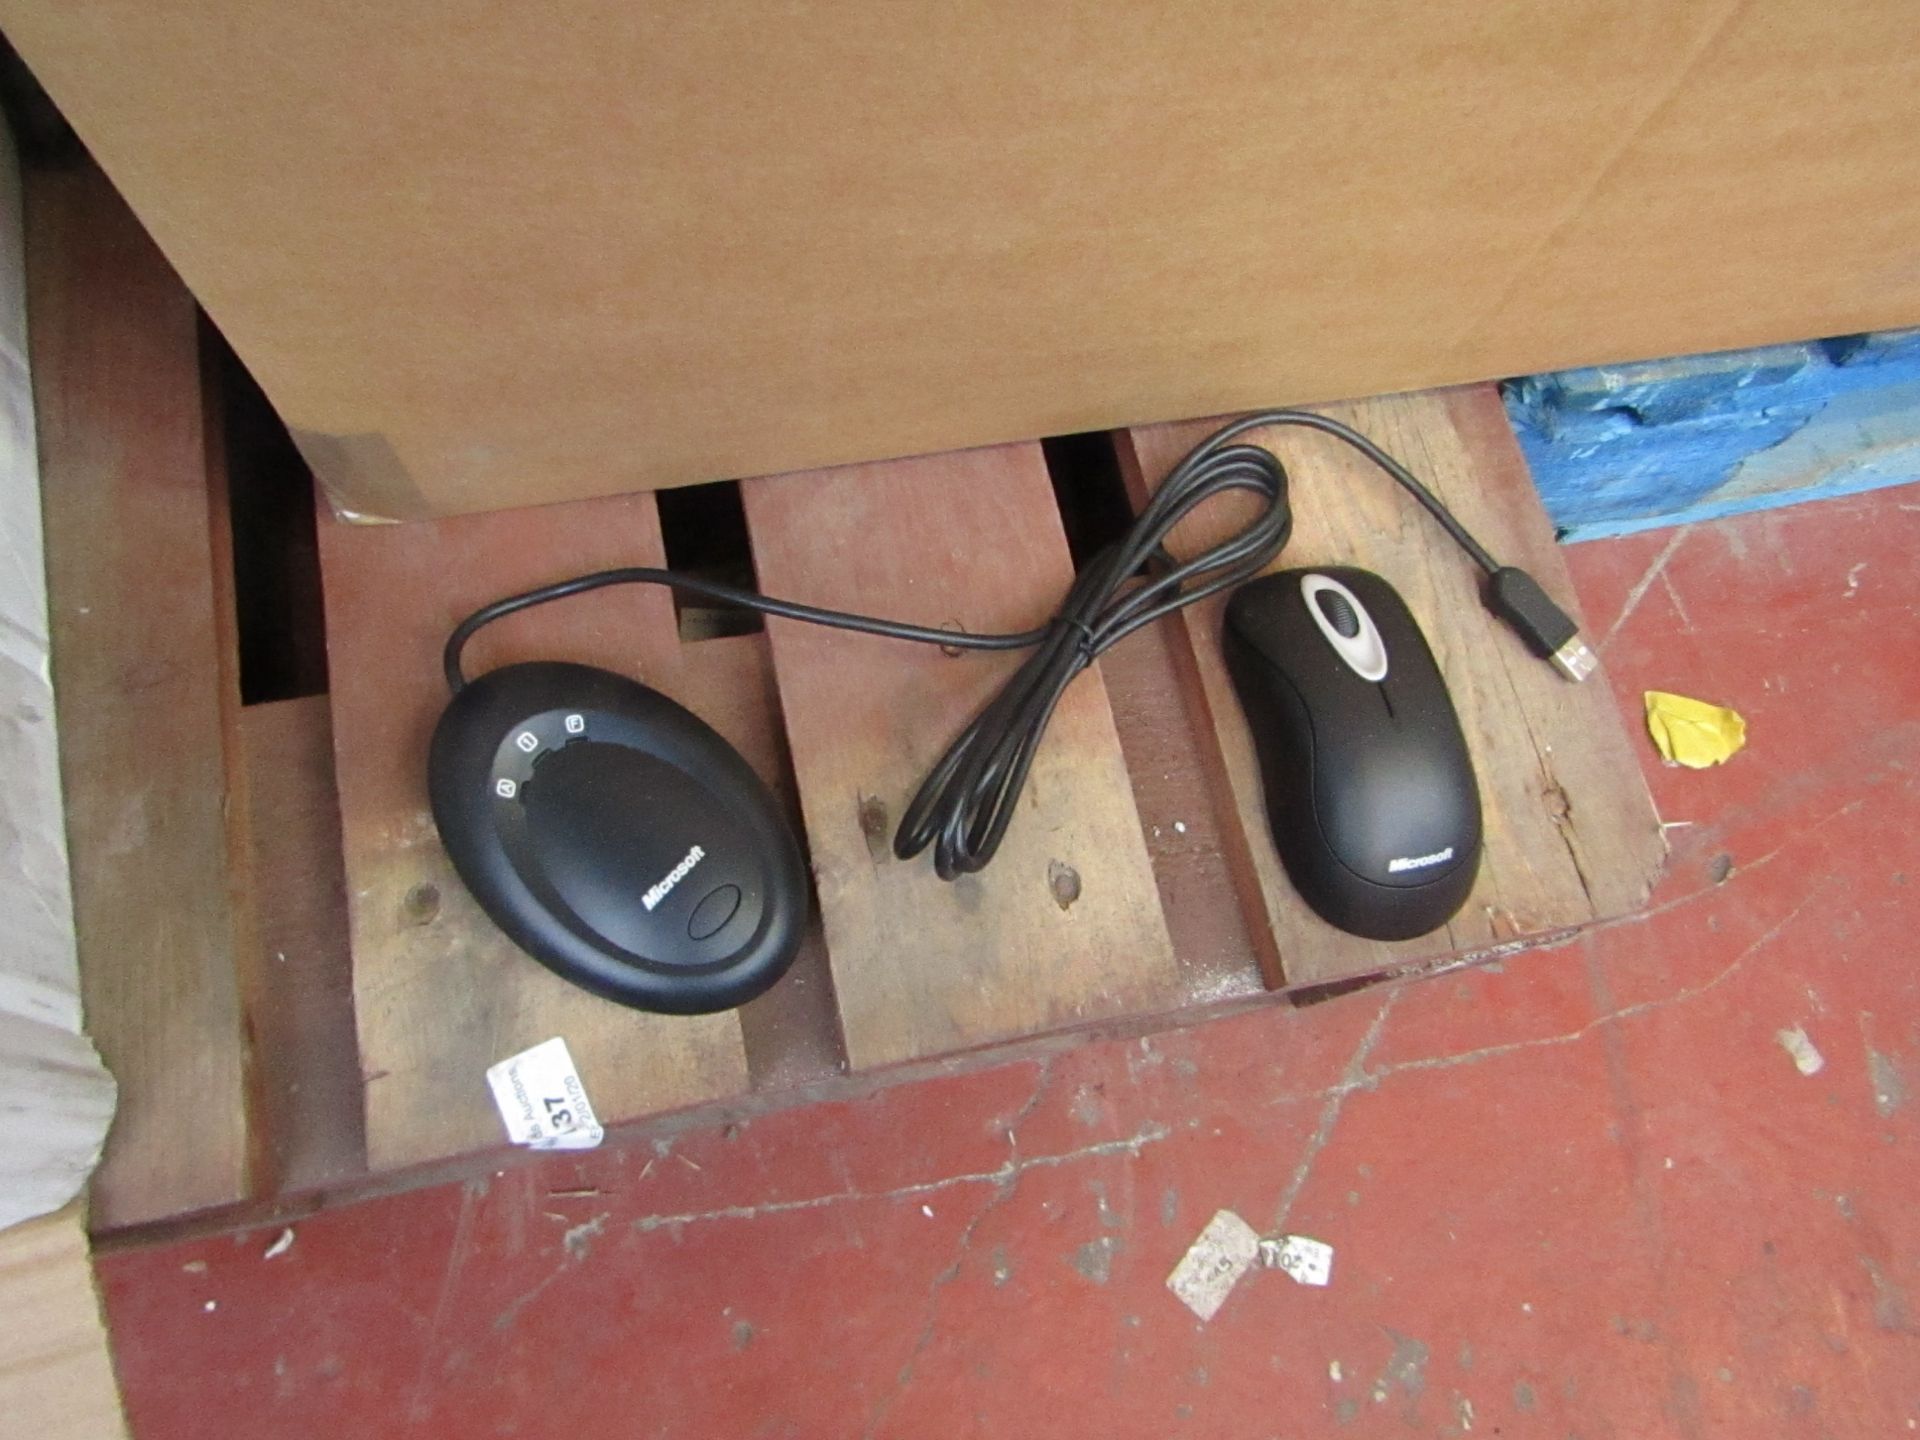 10X Microsoft - Wireless Optical Mouse 2000, packaged.